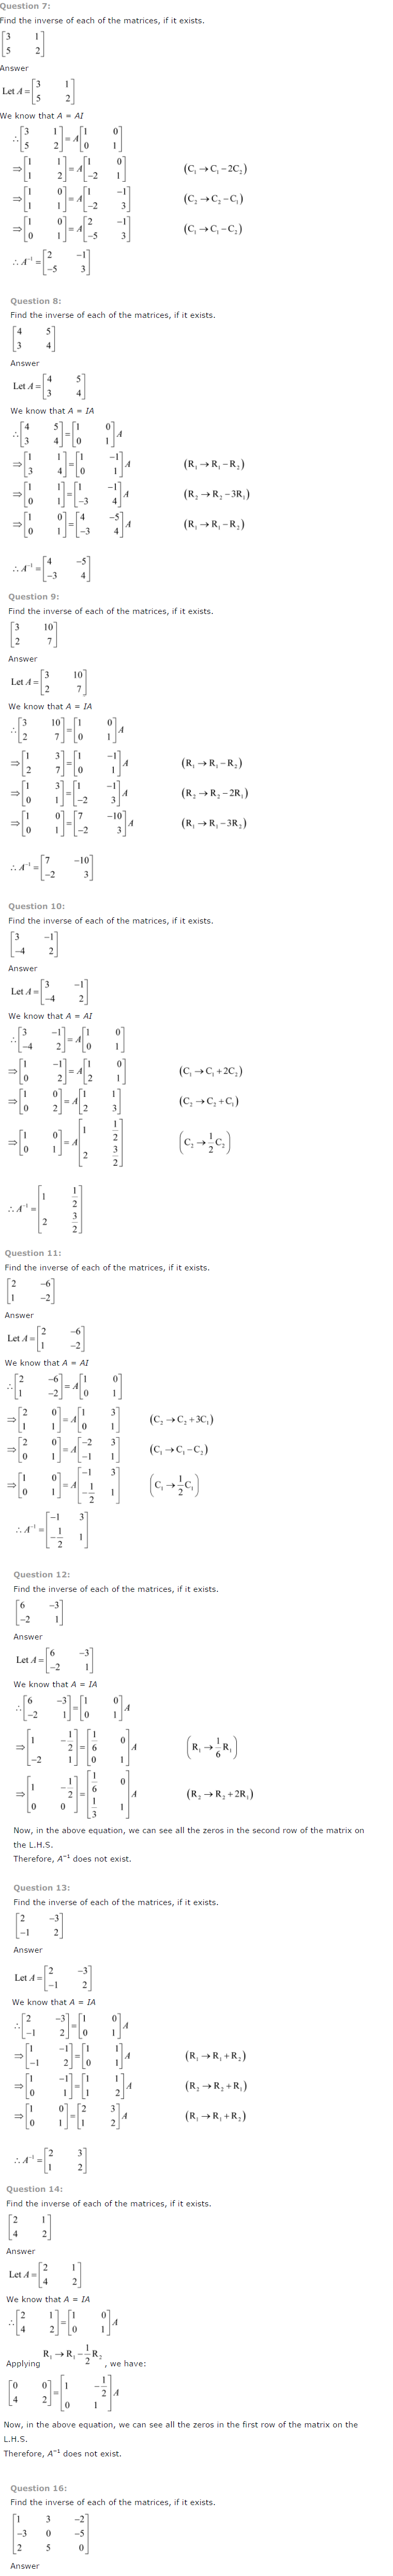 NCERT Solutions for Class 12 Maths Chapter 3 Matrices 10